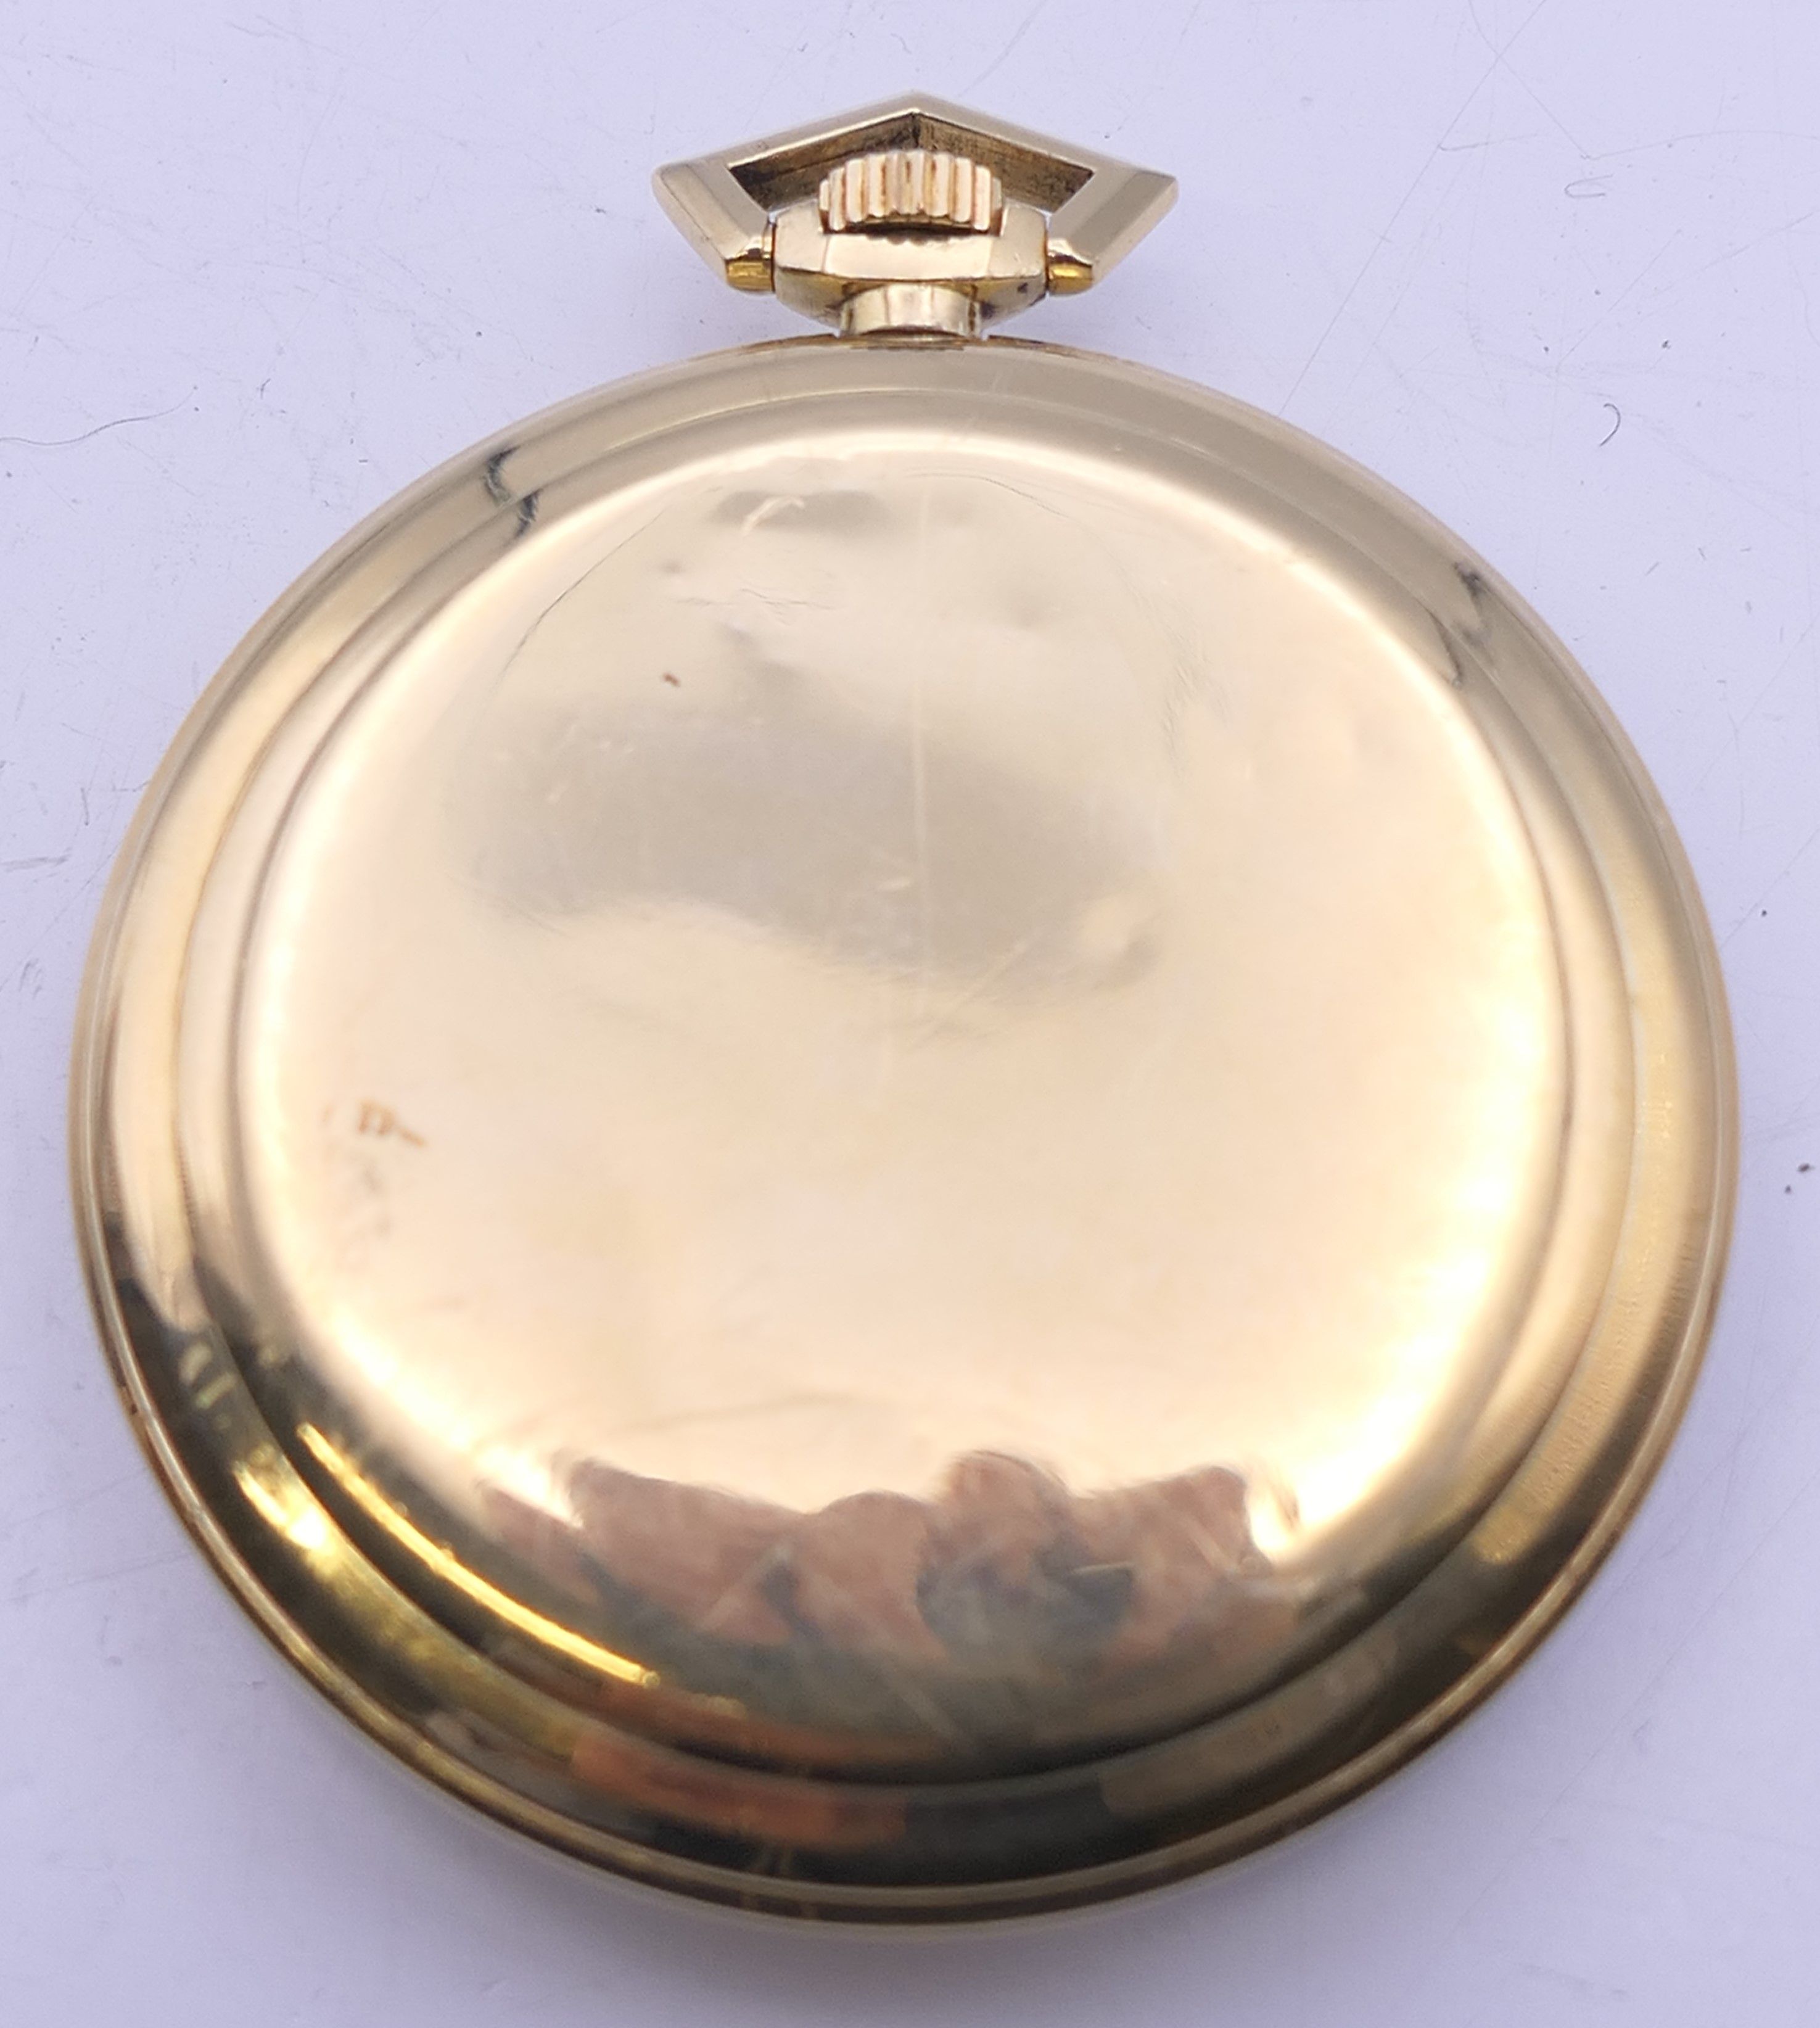 A 14 ct gold Record pocket watch. 4.5 cm diameter. 53.8 grammes total weight. - Image 2 of 5